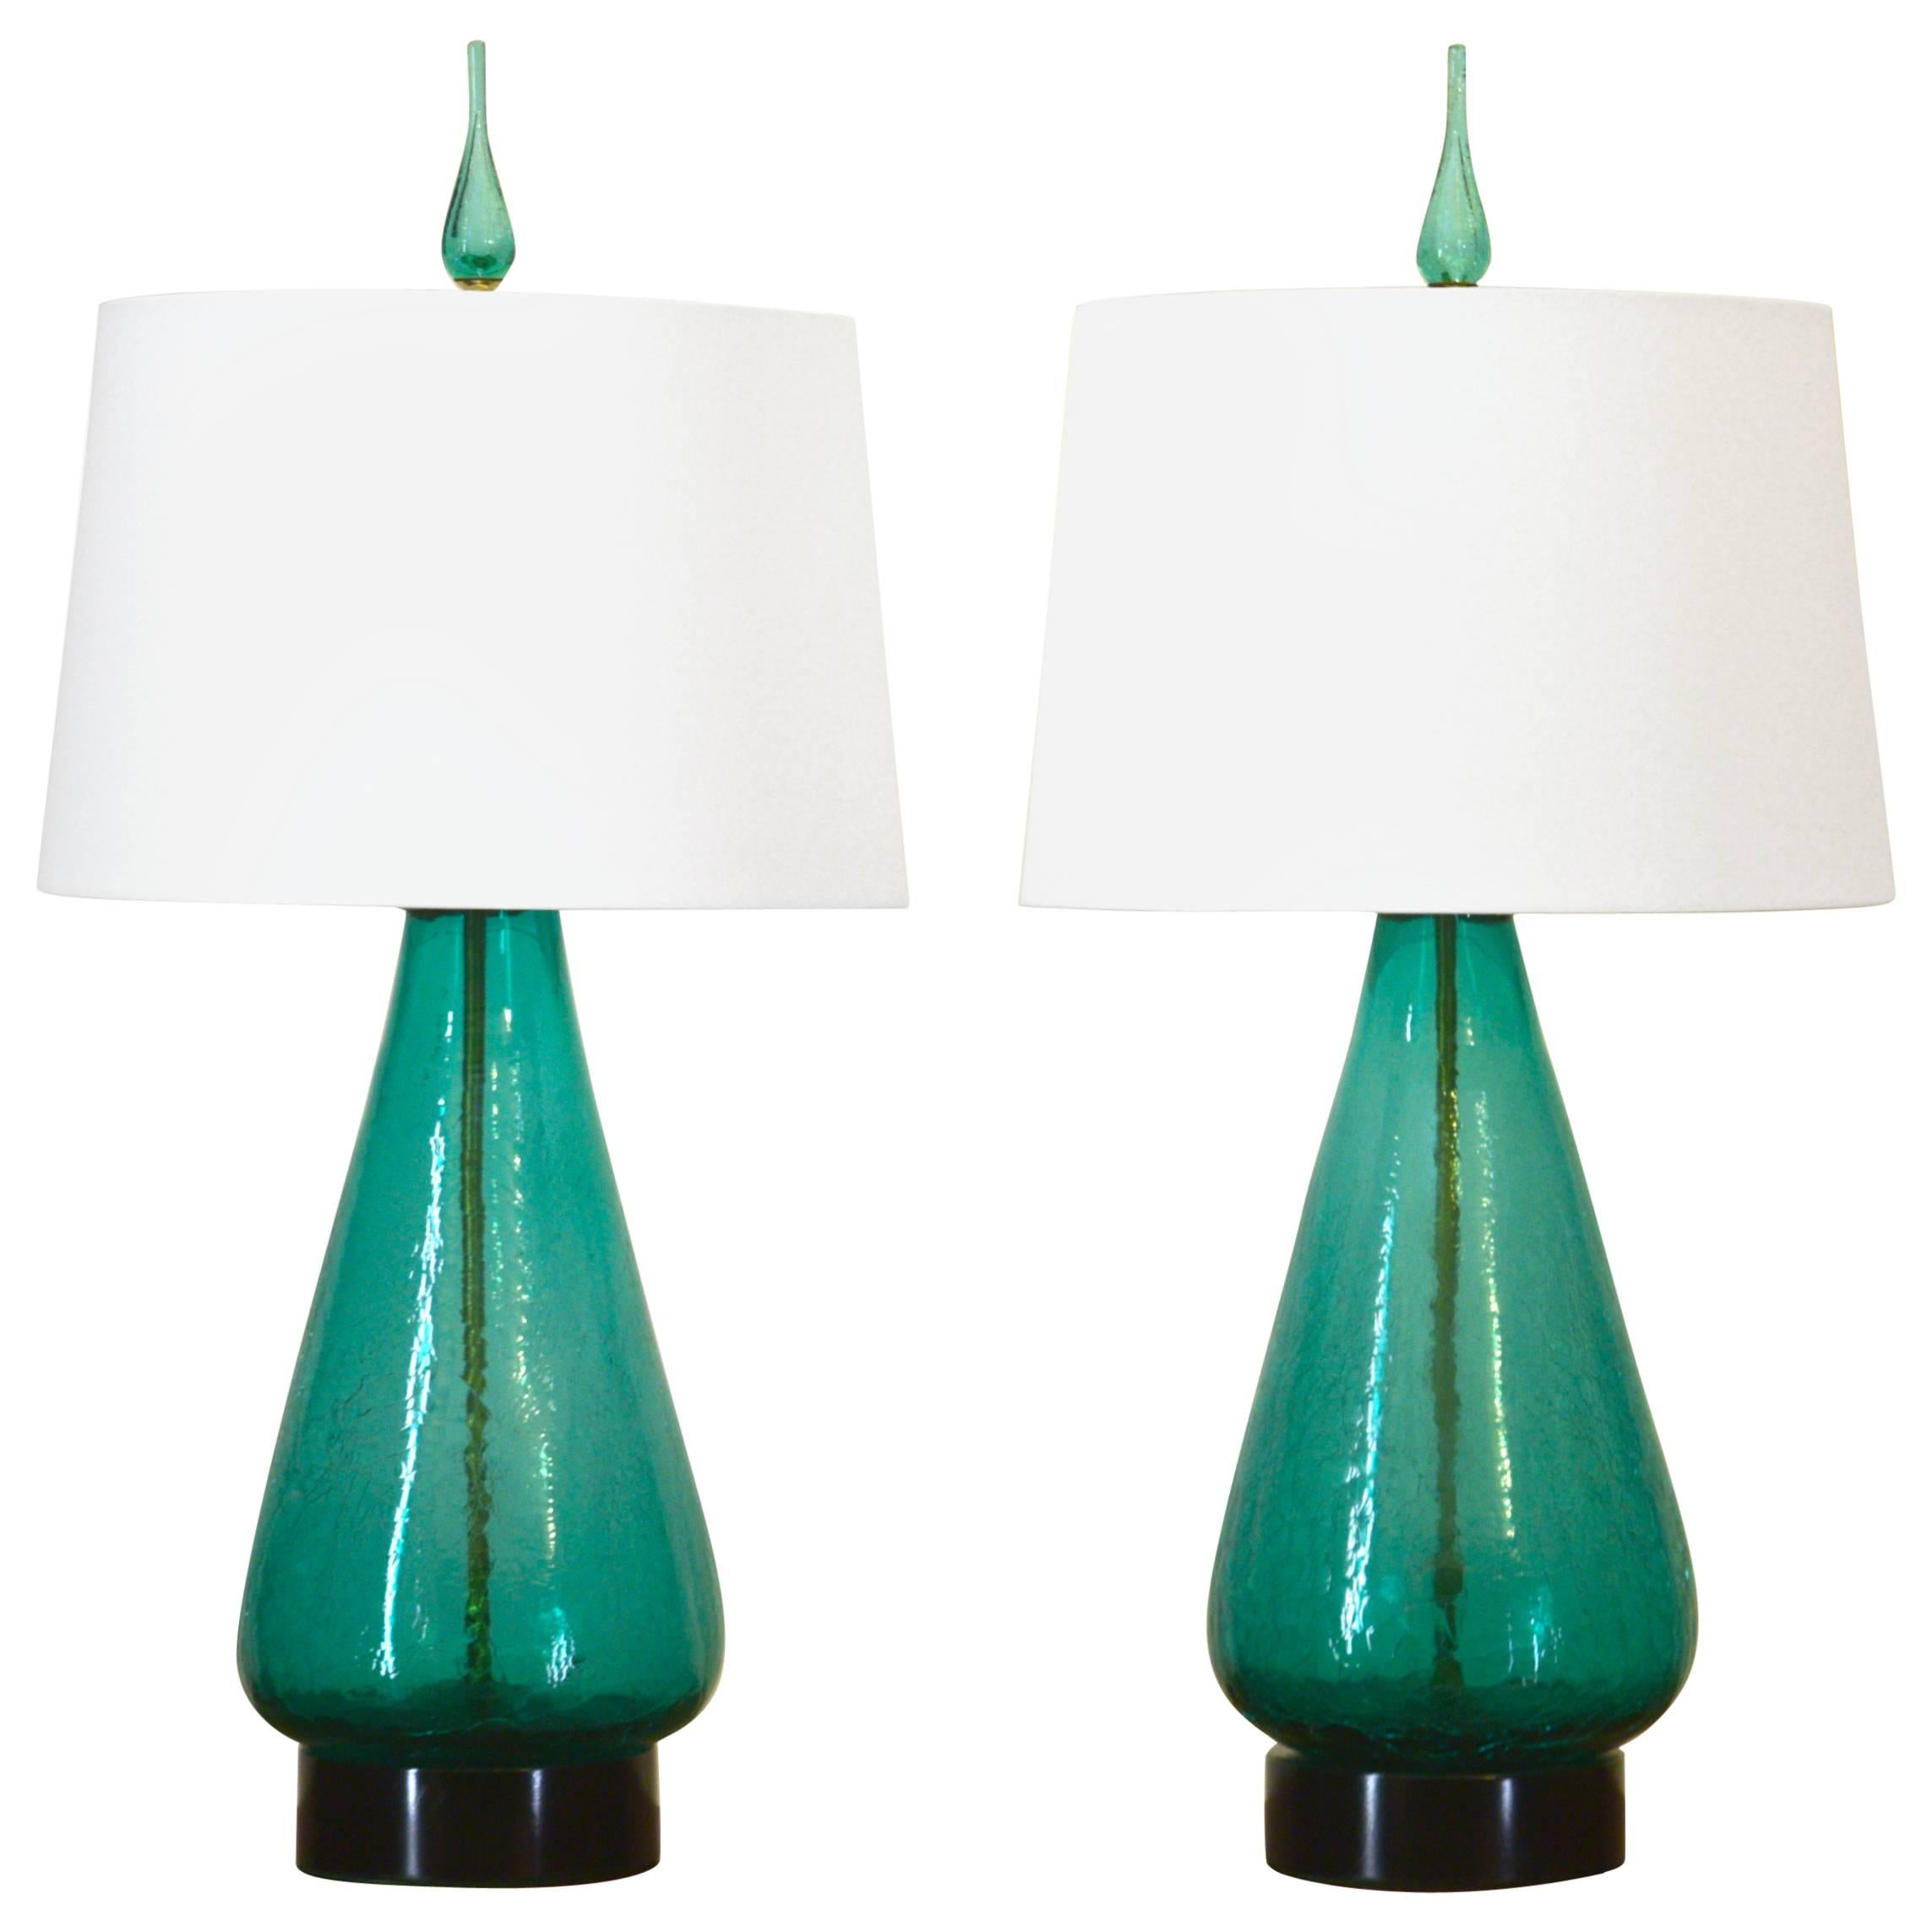 A delightful pair of Blenko glass table lamps from the early 1960s in crackled sea green.  Positioned on black enamel metal bases with all new wiring and felt. All original sockets and harps featuring three-way power sockets and 12 foot table lamp